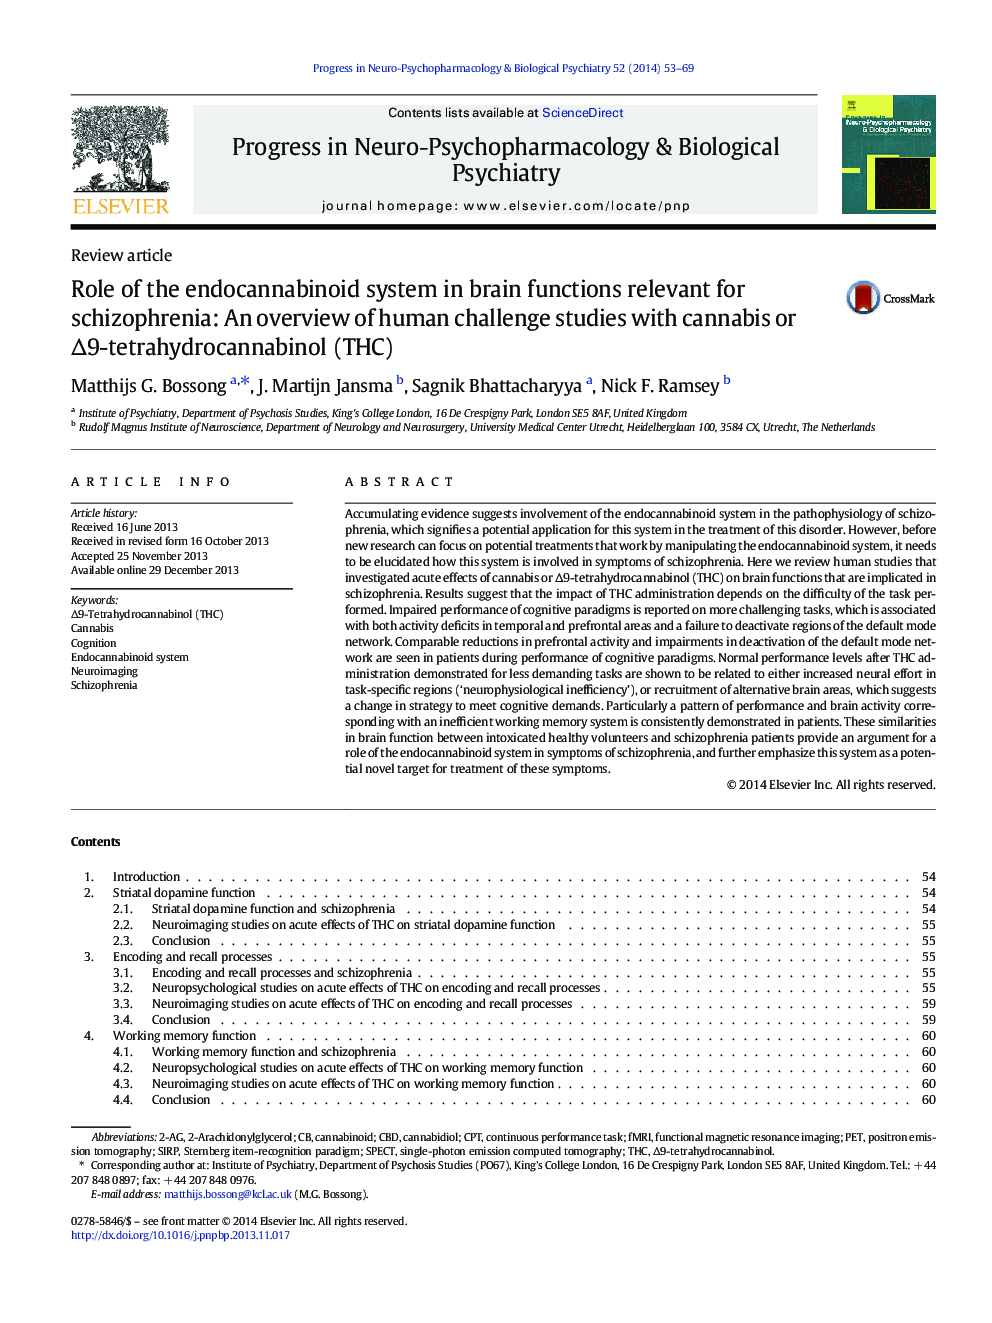 Role of the endocannabinoid system in brain functions relevant for schizophrenia: An overview of human challenge studies with cannabis or ∆9-tetrahydrocannabinol (THC)